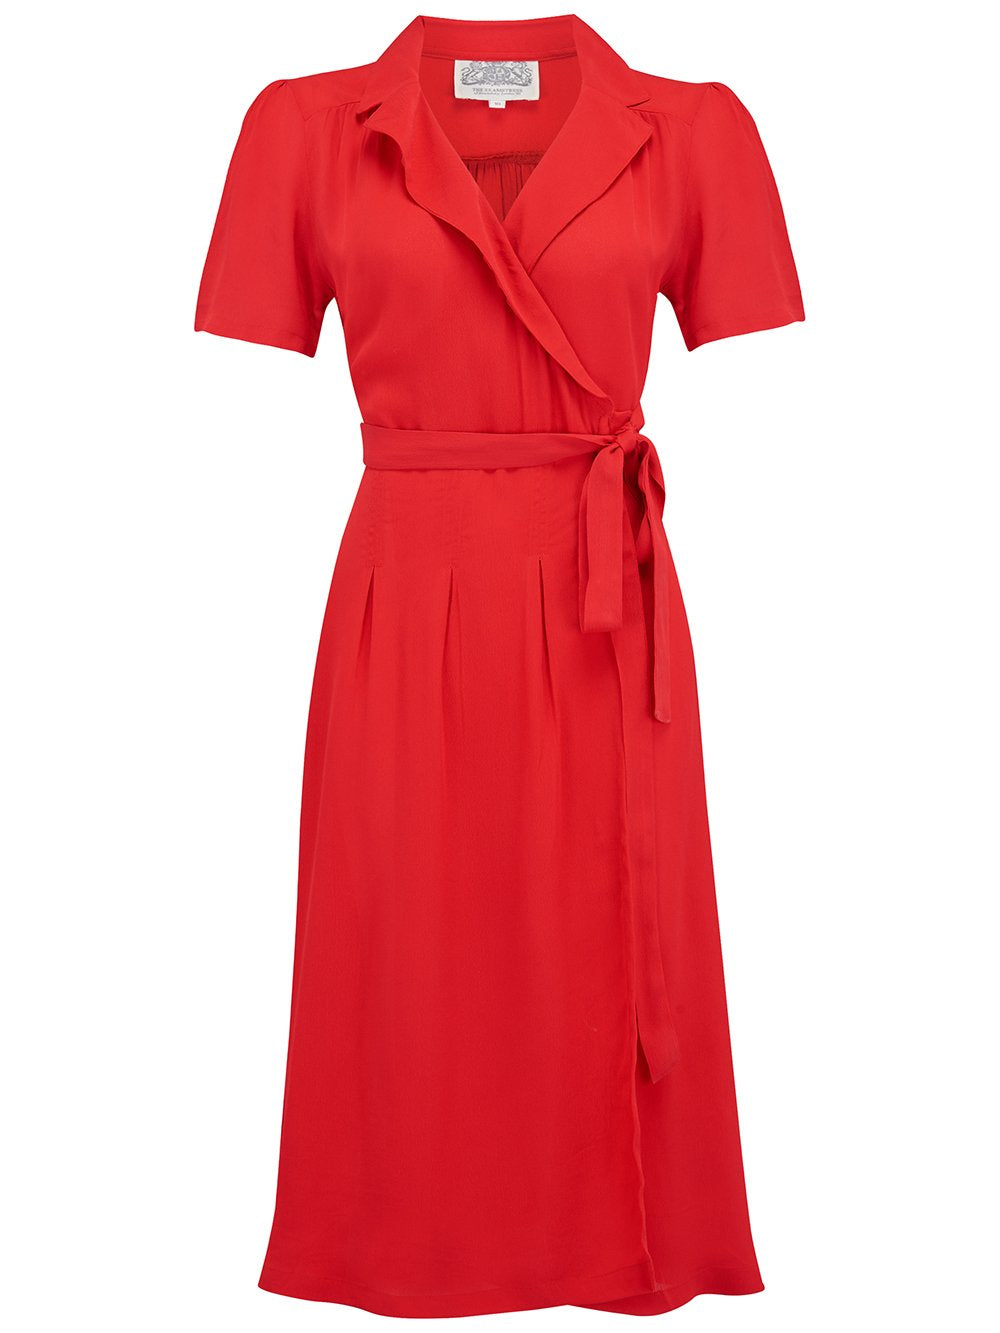 "Peggy" Wrap Dress in Solid Red, Classic 1940s Vintage Inspired Style - True and authentic vintage style clothing, inspired by the Classic styles of CC41 , WW2 and the fun 1950s RocknRoll era, for everyday wear plus events like Goodwood Revival, Twinwood Festival and Viva Las Vegas Rockabilly Weekend Rock n Romance The Seamstress of Bloomsbury